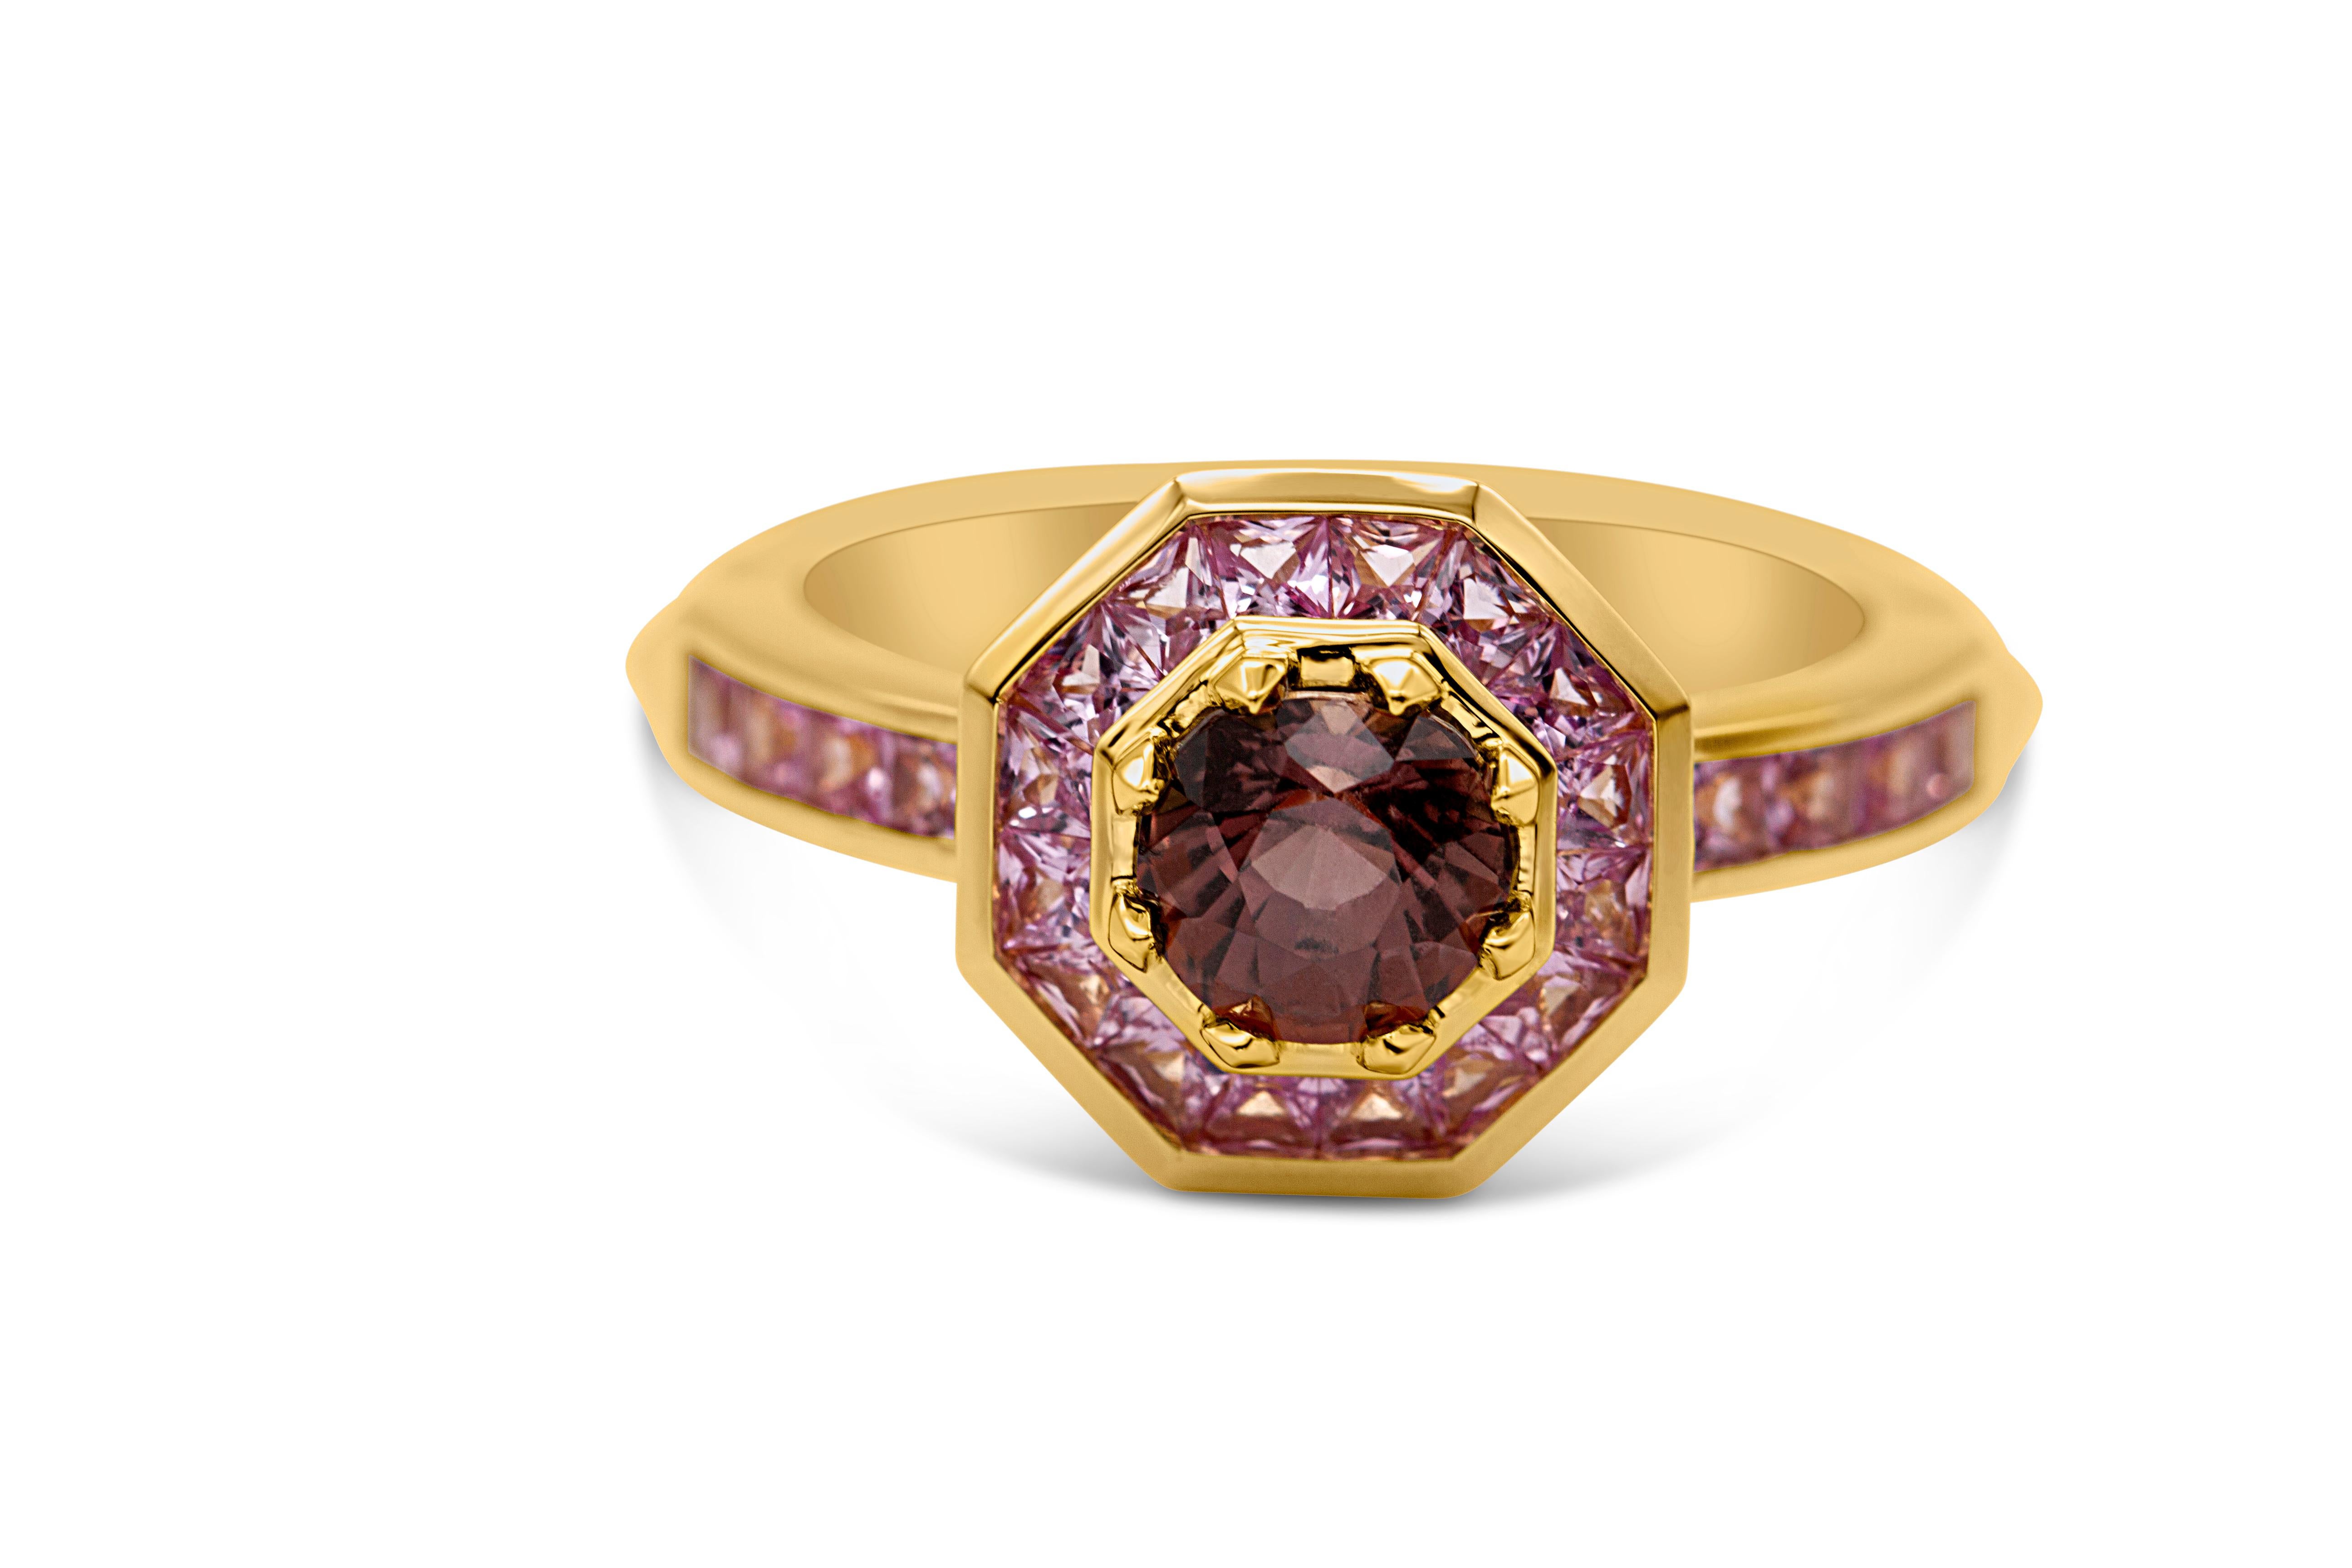 This ring is one of a kind.

18ct yellow gold with a 5.9 mm X 5.5 mm 1.06ct oval cut, colour-changing sapphire. The central stone changes with the light, revealing shades of deep red through to orange, framed by channel set pink sapphires on the